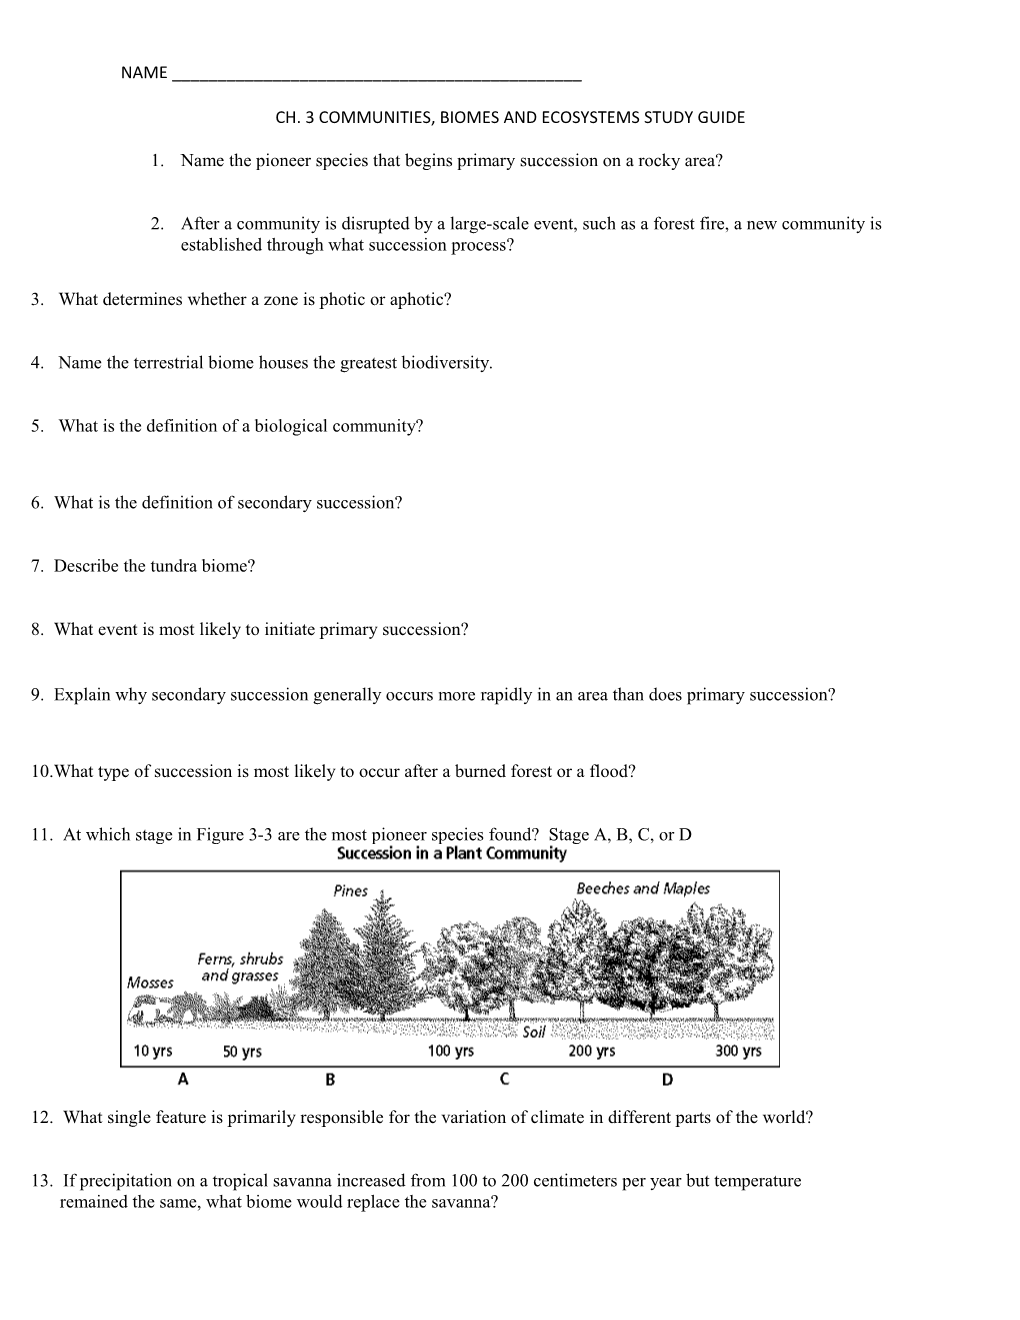 Ch. 3 Communities, Biomes and Ecosystems Study Guide